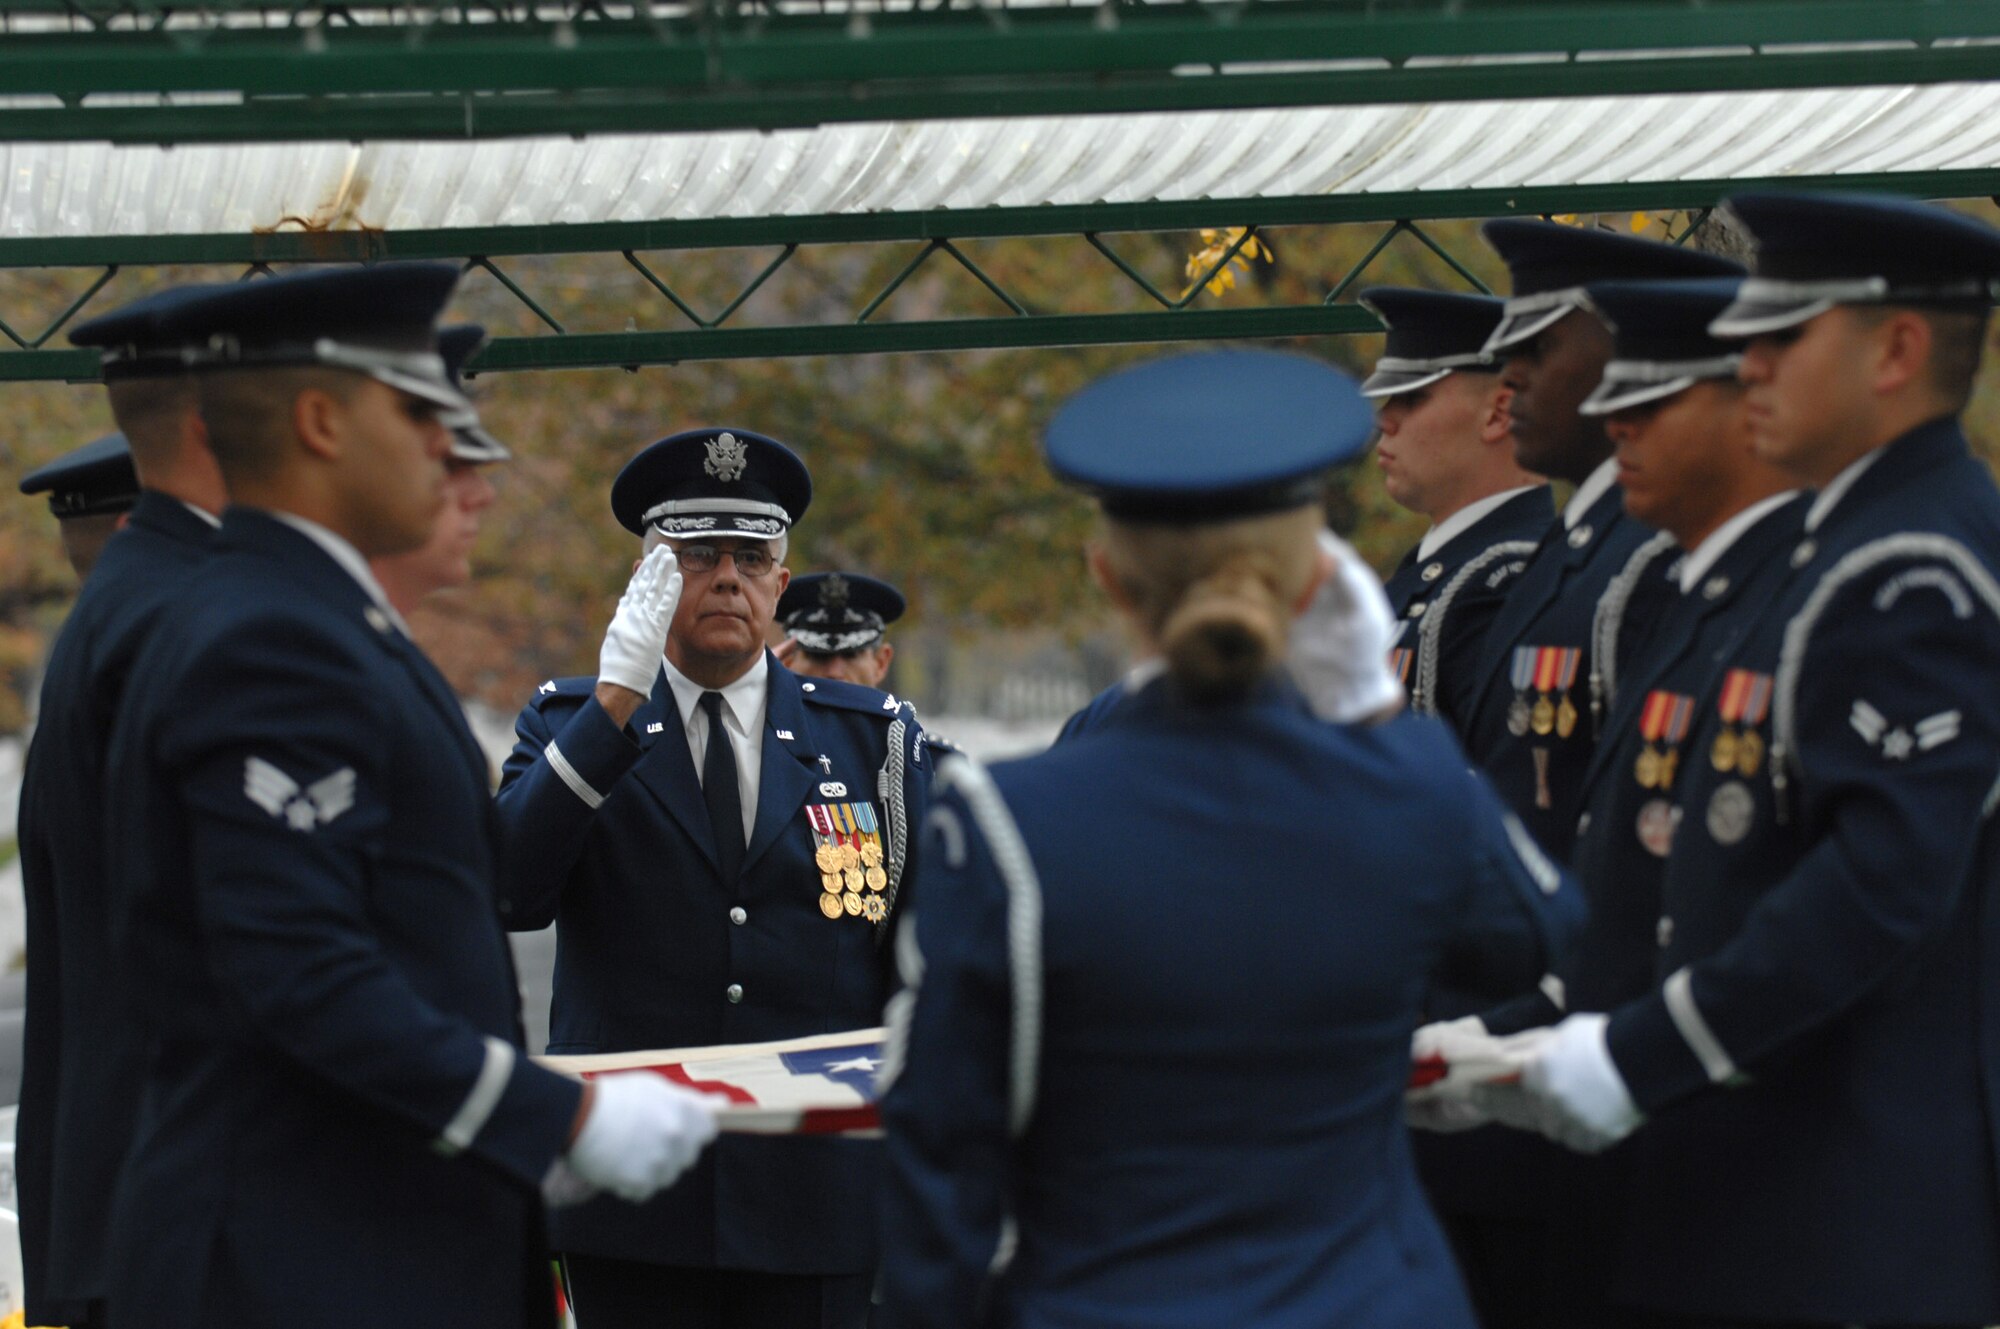 Chaplain (Col.) Charlie Stutts renders a salute prior to the flag folding at a group burial ceremony Nov. 14 at Arlington National Cemetery in Virginia. The group burial ceremony was held for six crewmembers that perished in a July 21 B-52 Stratofortress crash off Guam's Northwest coast. (U.S. Air Force photo/Staff Sgt. Catherine Thompson) 
